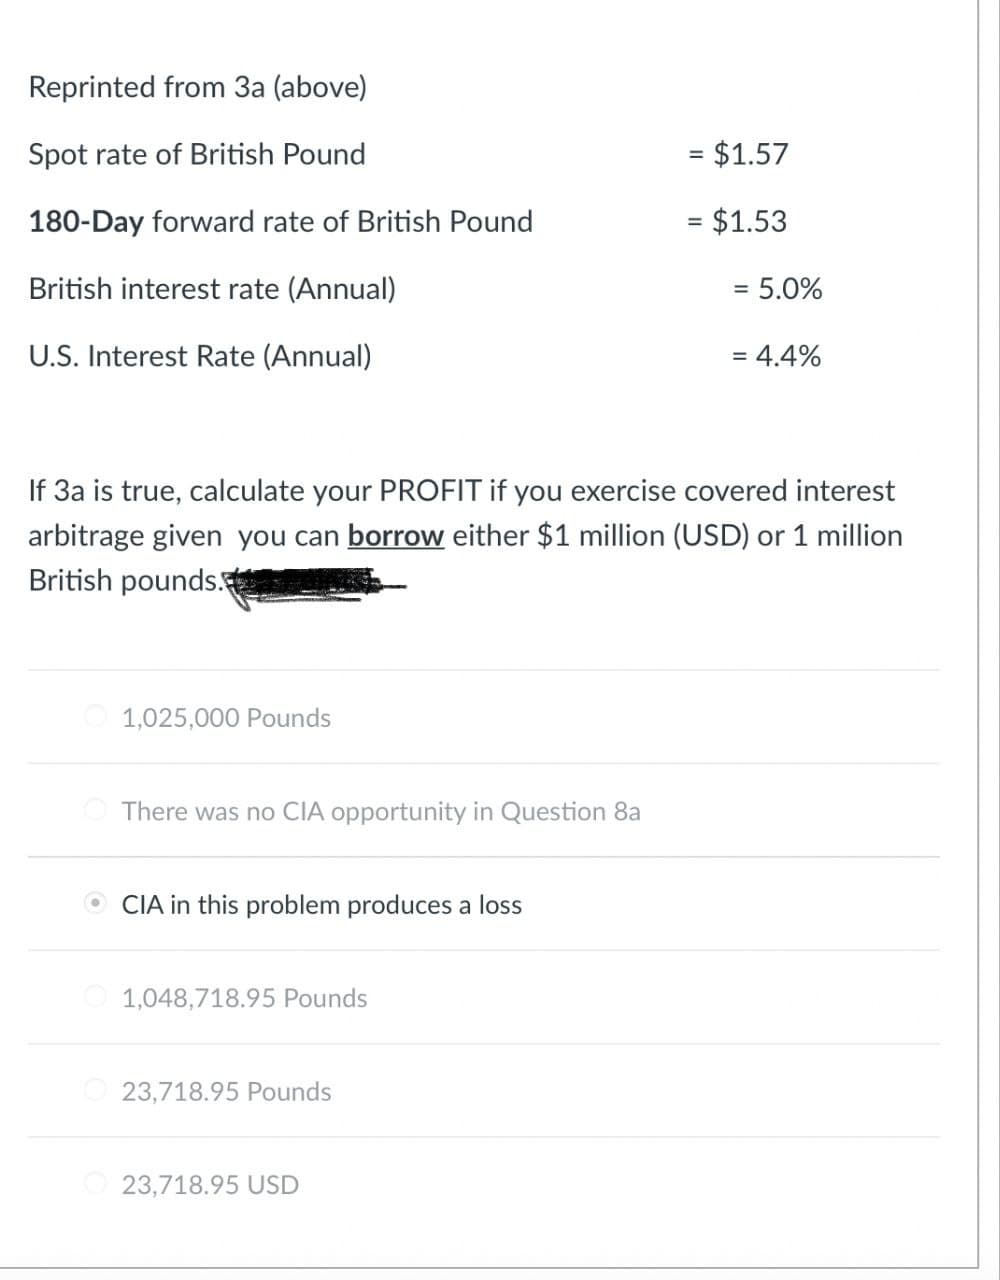 Reprinted from 3a (above)
Spot rate of British Pound
= $1.57
180-Day forward rate of British Pound
= $1.53
British interest rate (Annual)
= = 5.0%
U.S. Interest Rate (Annual)
= 4.4%
If 3a is true, calculate your PROFIT if you exercise covered interest
arbitrage given you can borrow either $1 million (USD) or 1 million
British pounds.
1,025,000 Pounds
There was no CIA opportunity in Question 8a
CIA in this problem produces a loss
1,048,718.95 Pounds
23,718.95 Pounds
23,718.95 USD